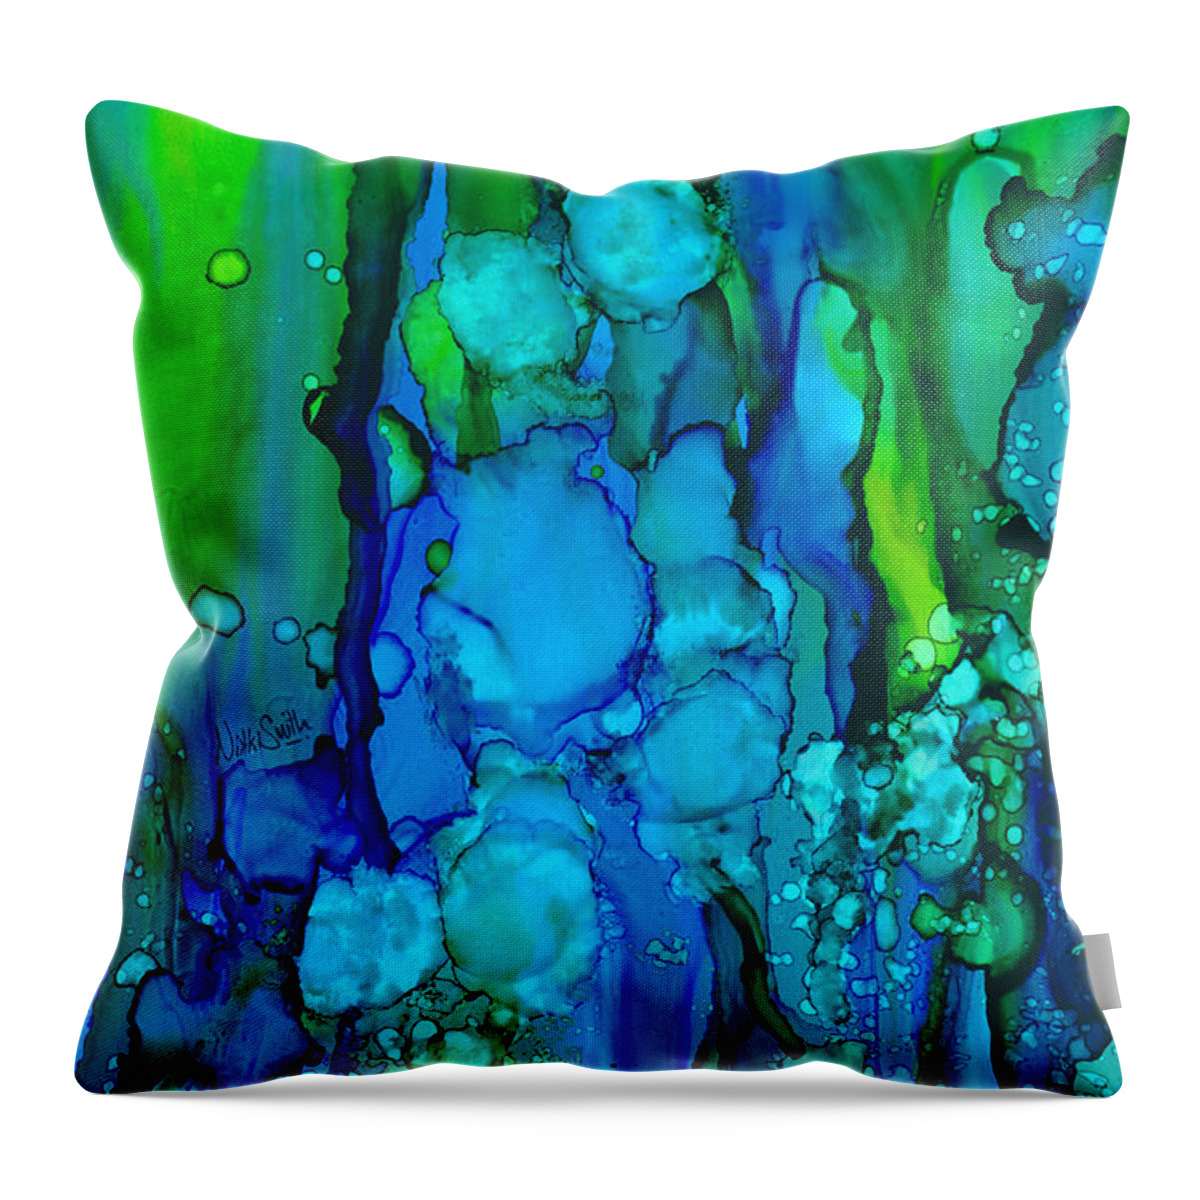 Alcohol Ink Throw Pillow featuring the painting Ocean Depths by Nikki Marie Smith